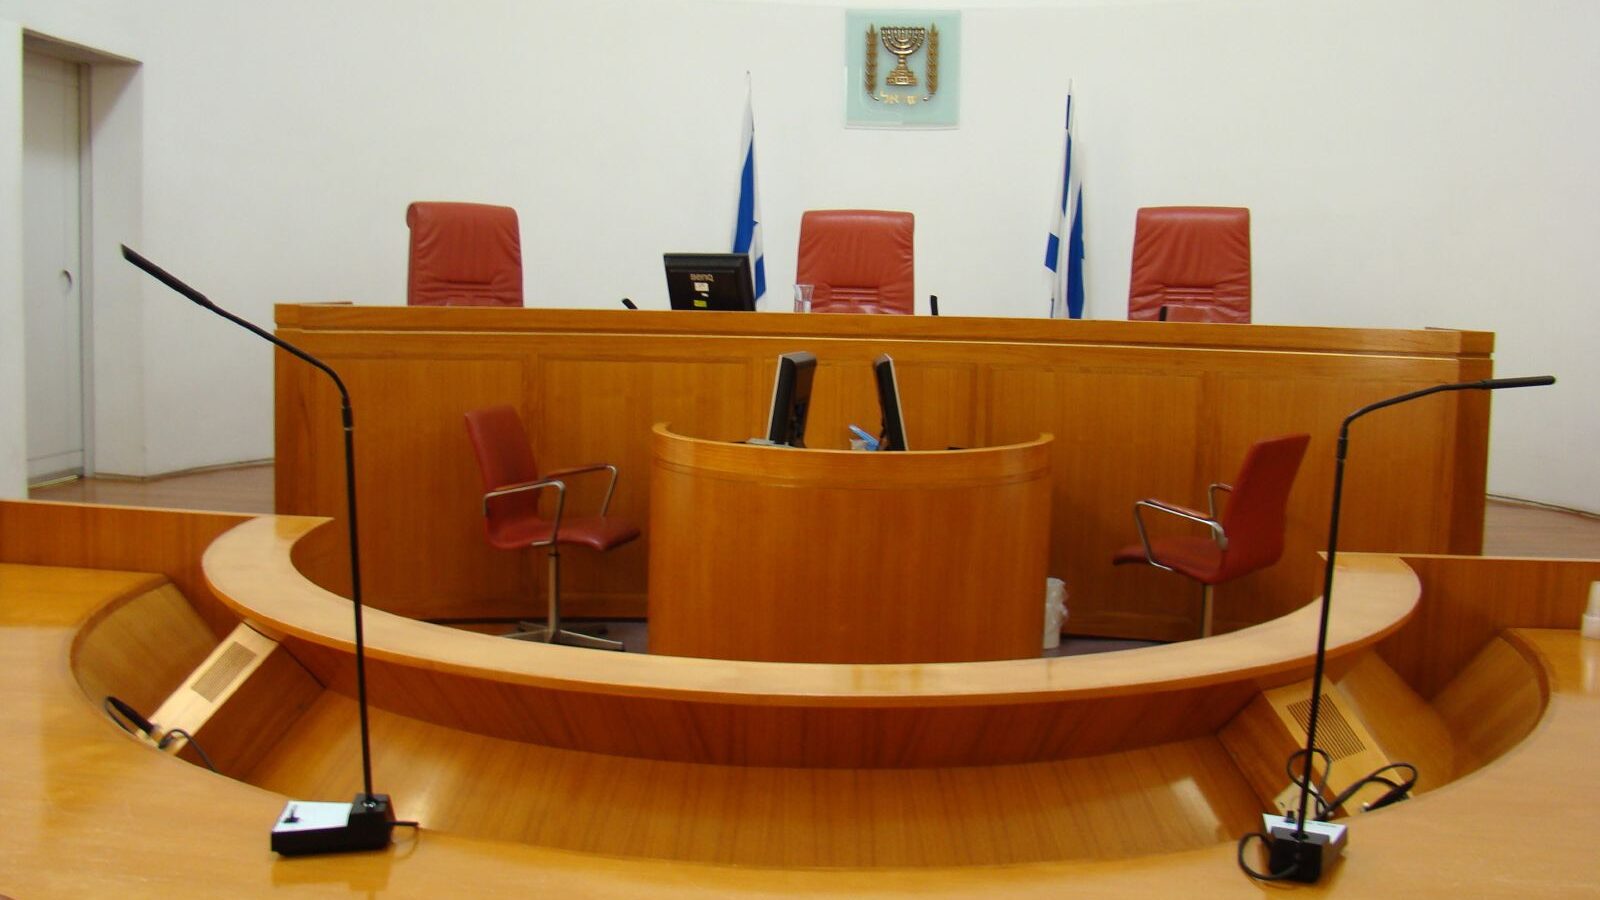 Examining Israeli President’s Judicial Reform Compromise Snubbed by Both Sides